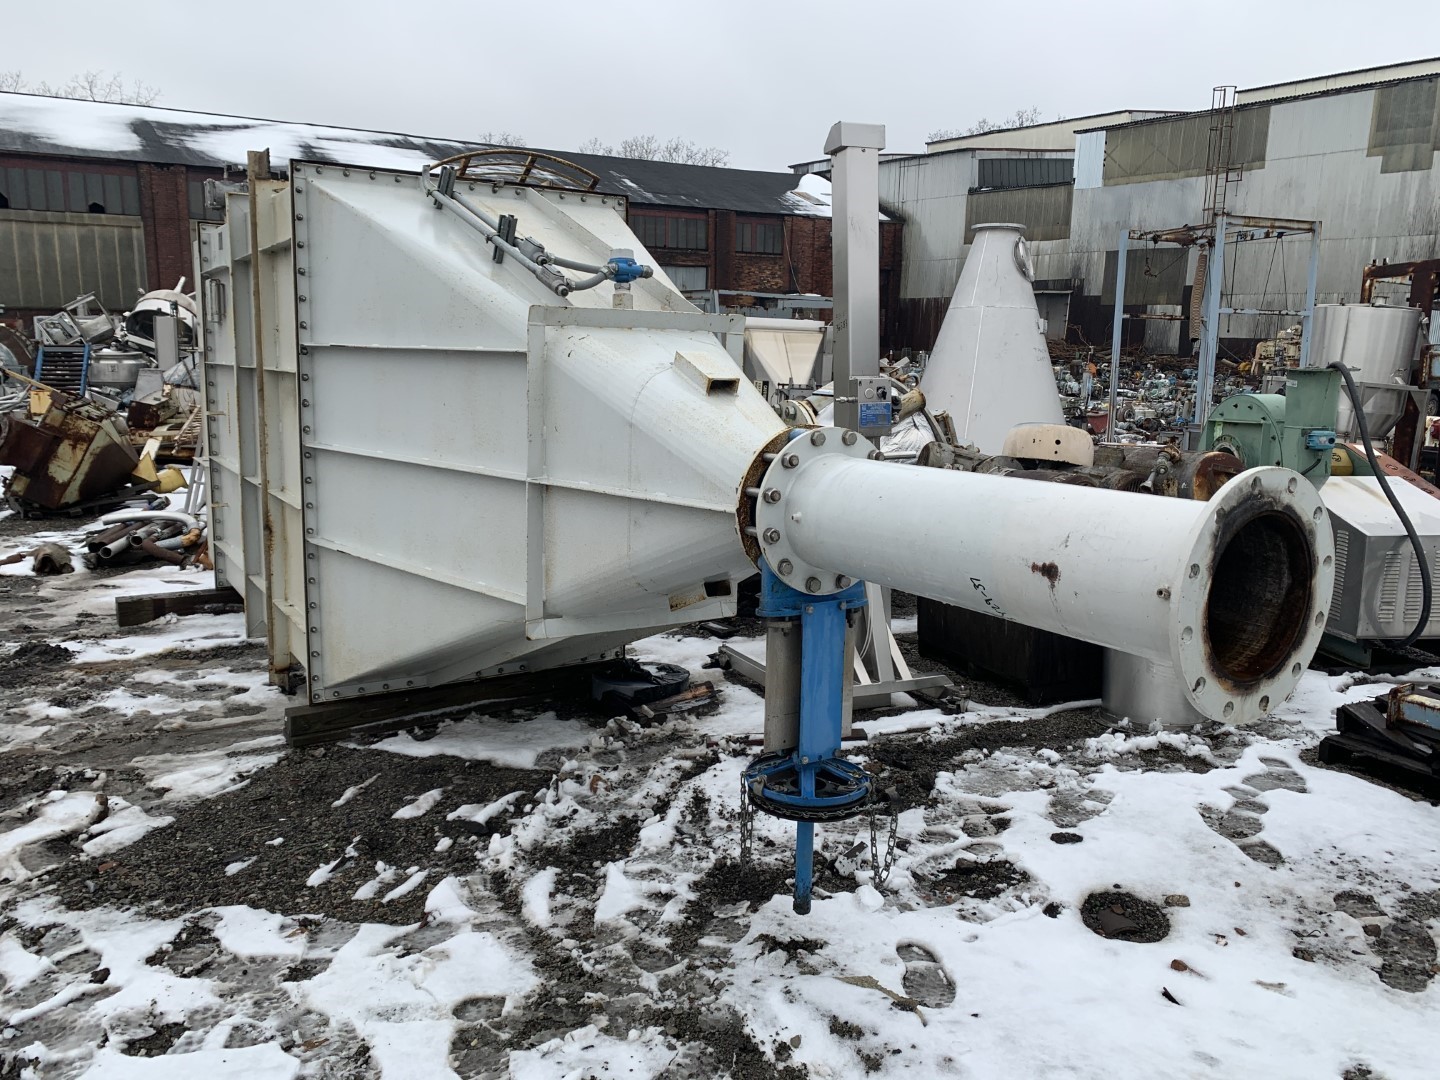 753 Sq Ft MikroPul Dust Collector, Model DAE77L, C/S